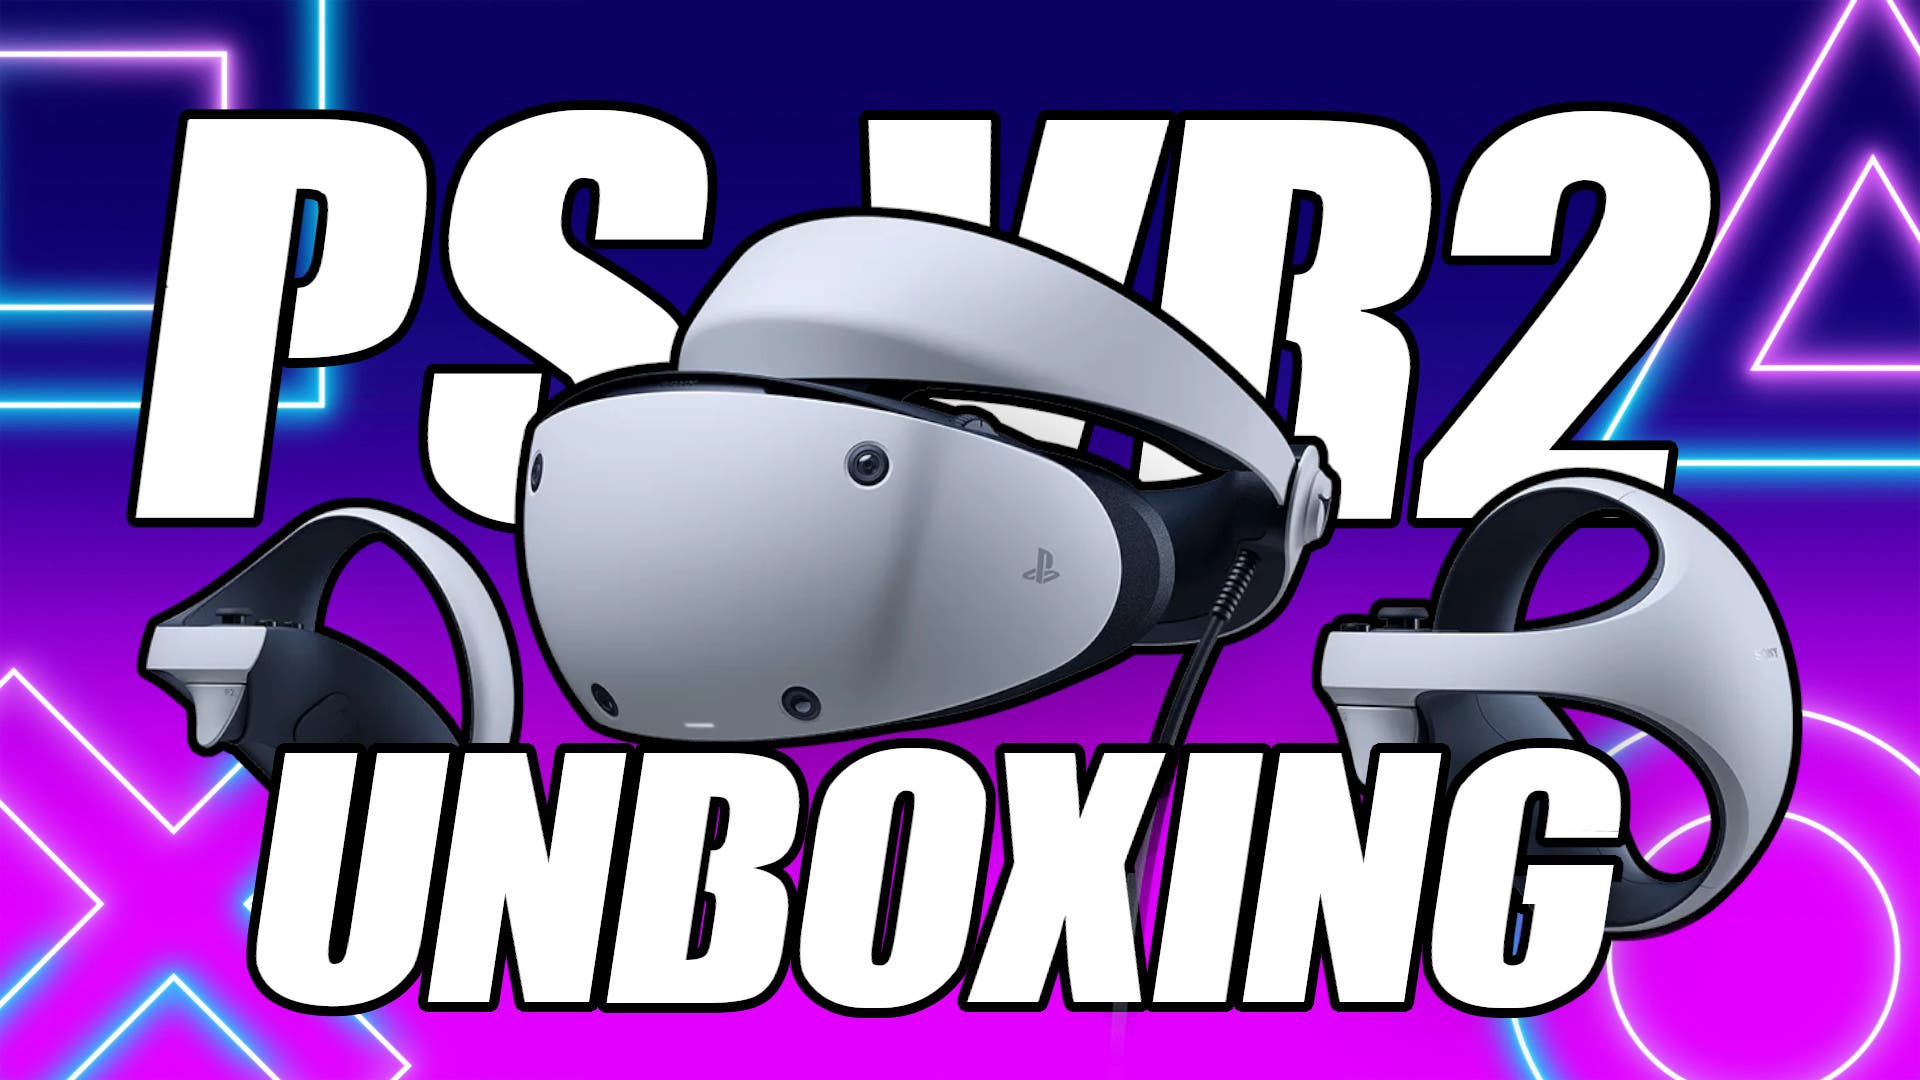 PS VR2 unboxing: that’s all the box includes